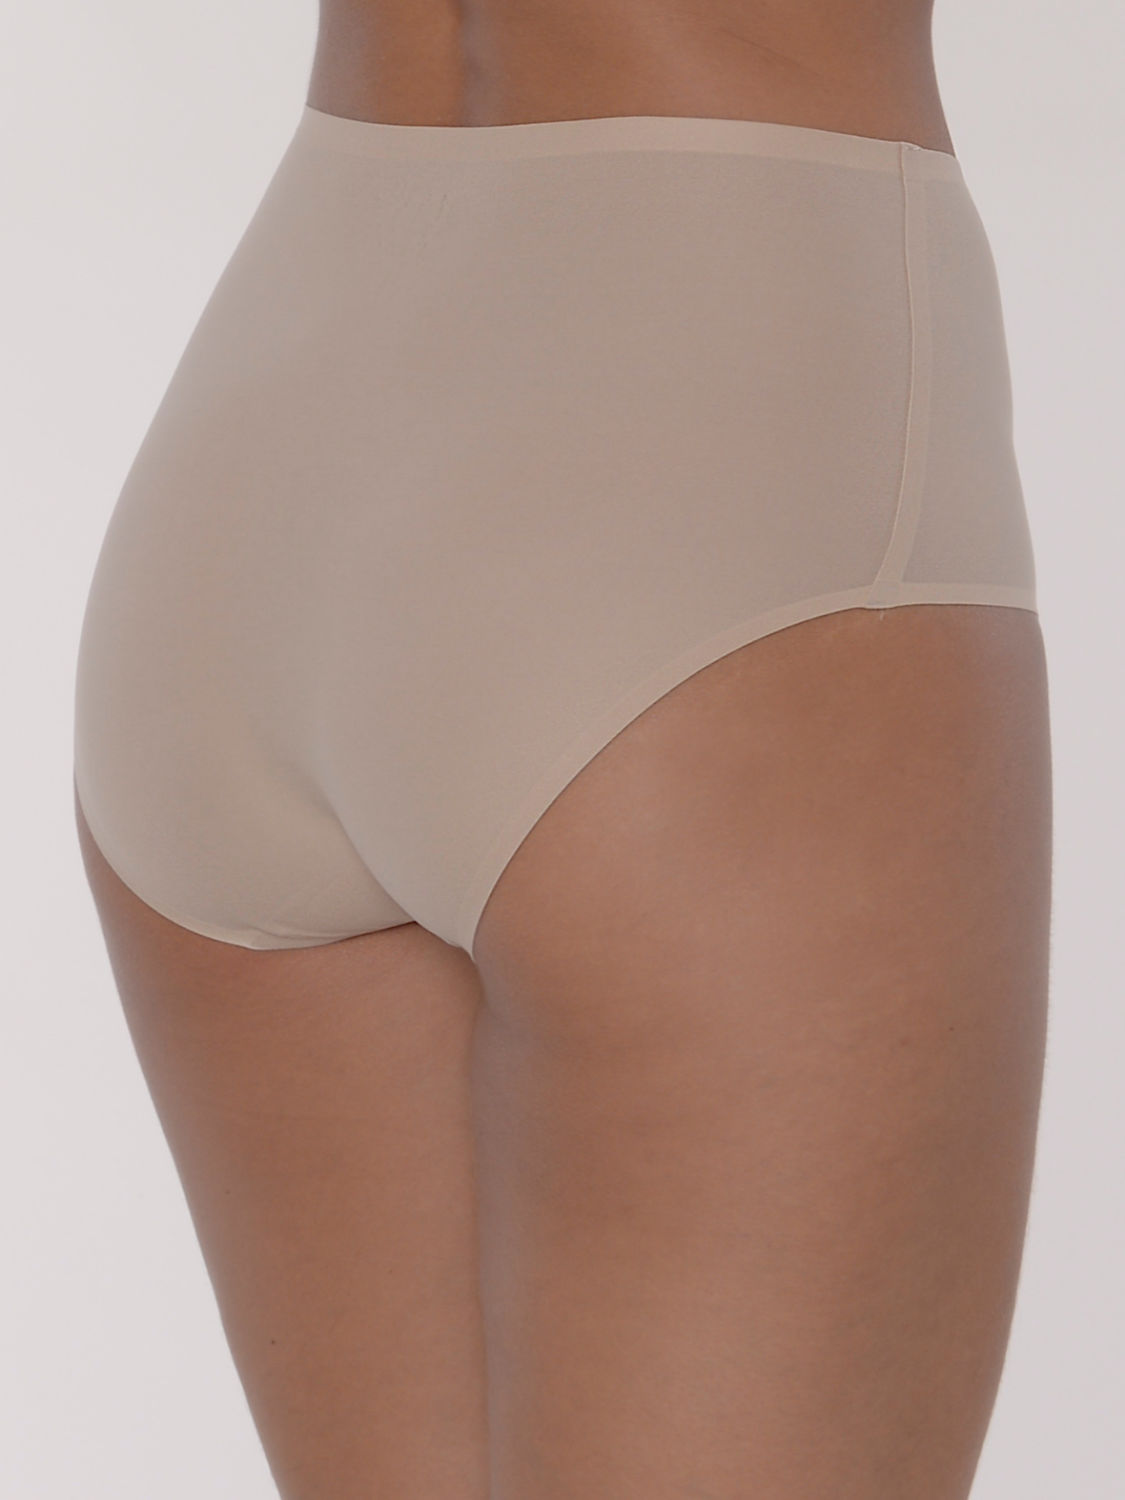 Chantelle Taillenslip ONE SIZE SoftStretch Farbe Nude